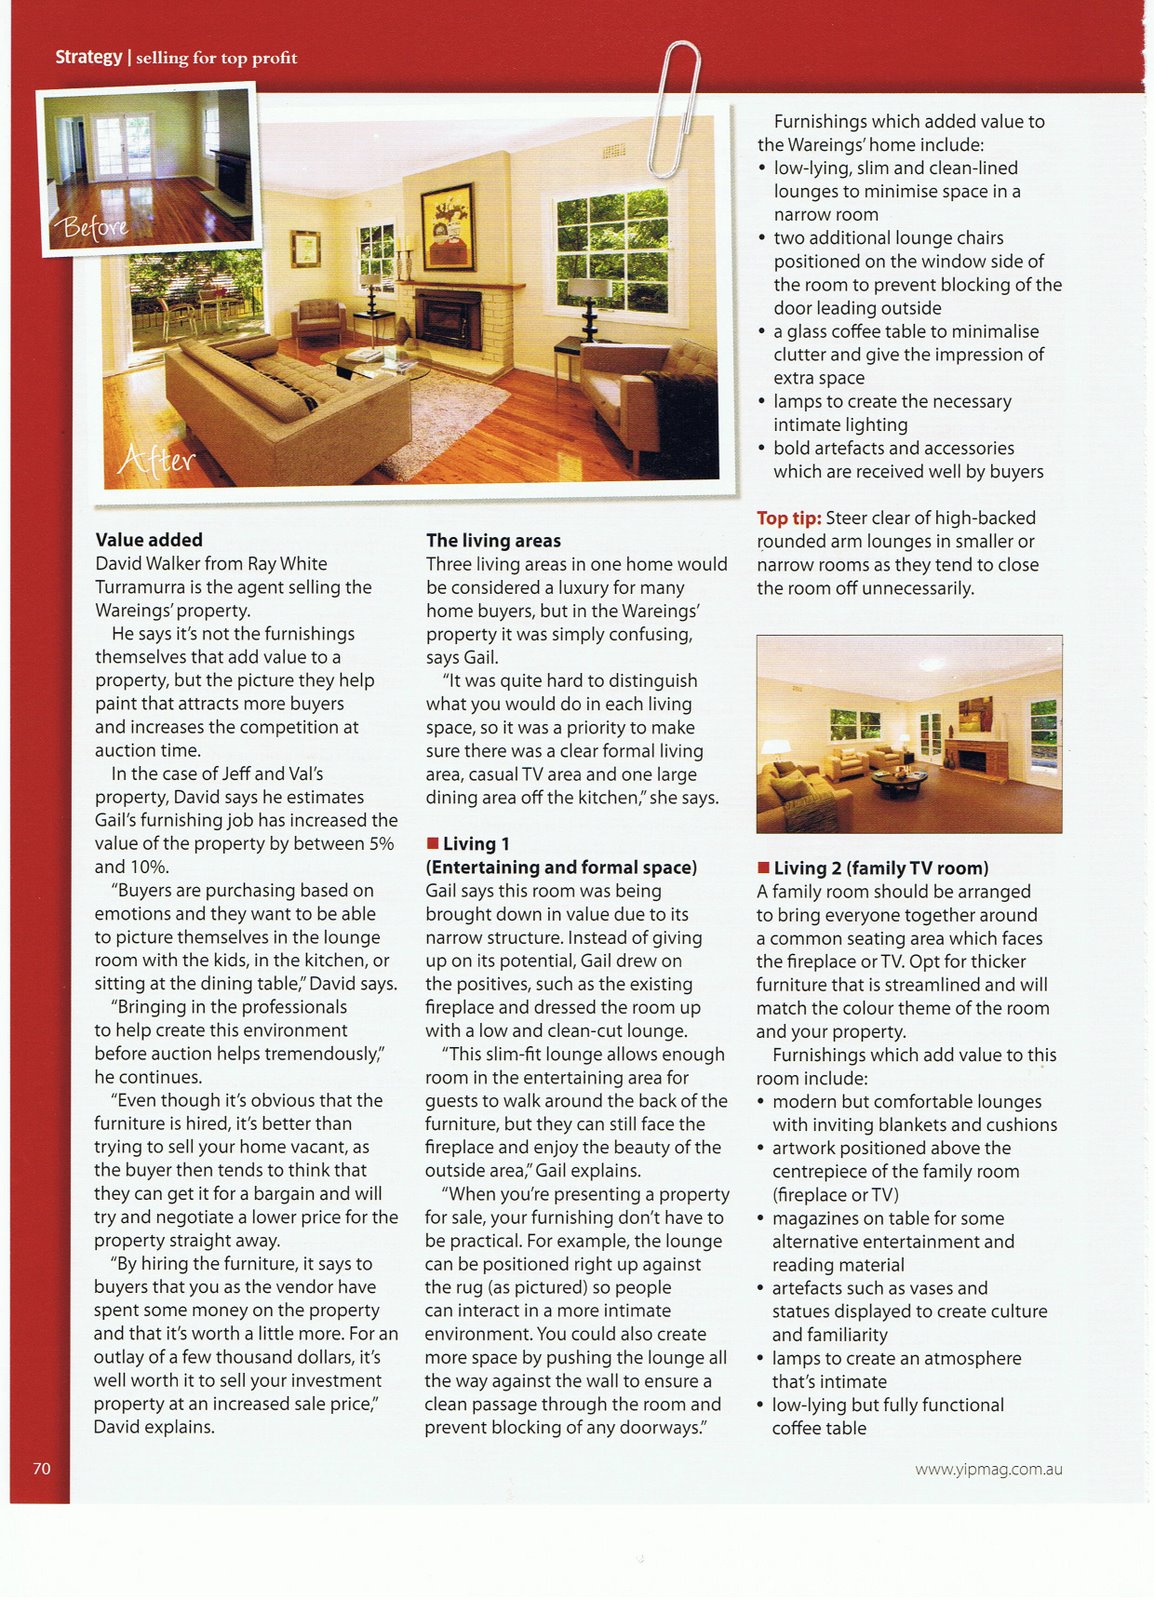 [My+Investment+Property+Article+March+2009+(2).jpg]